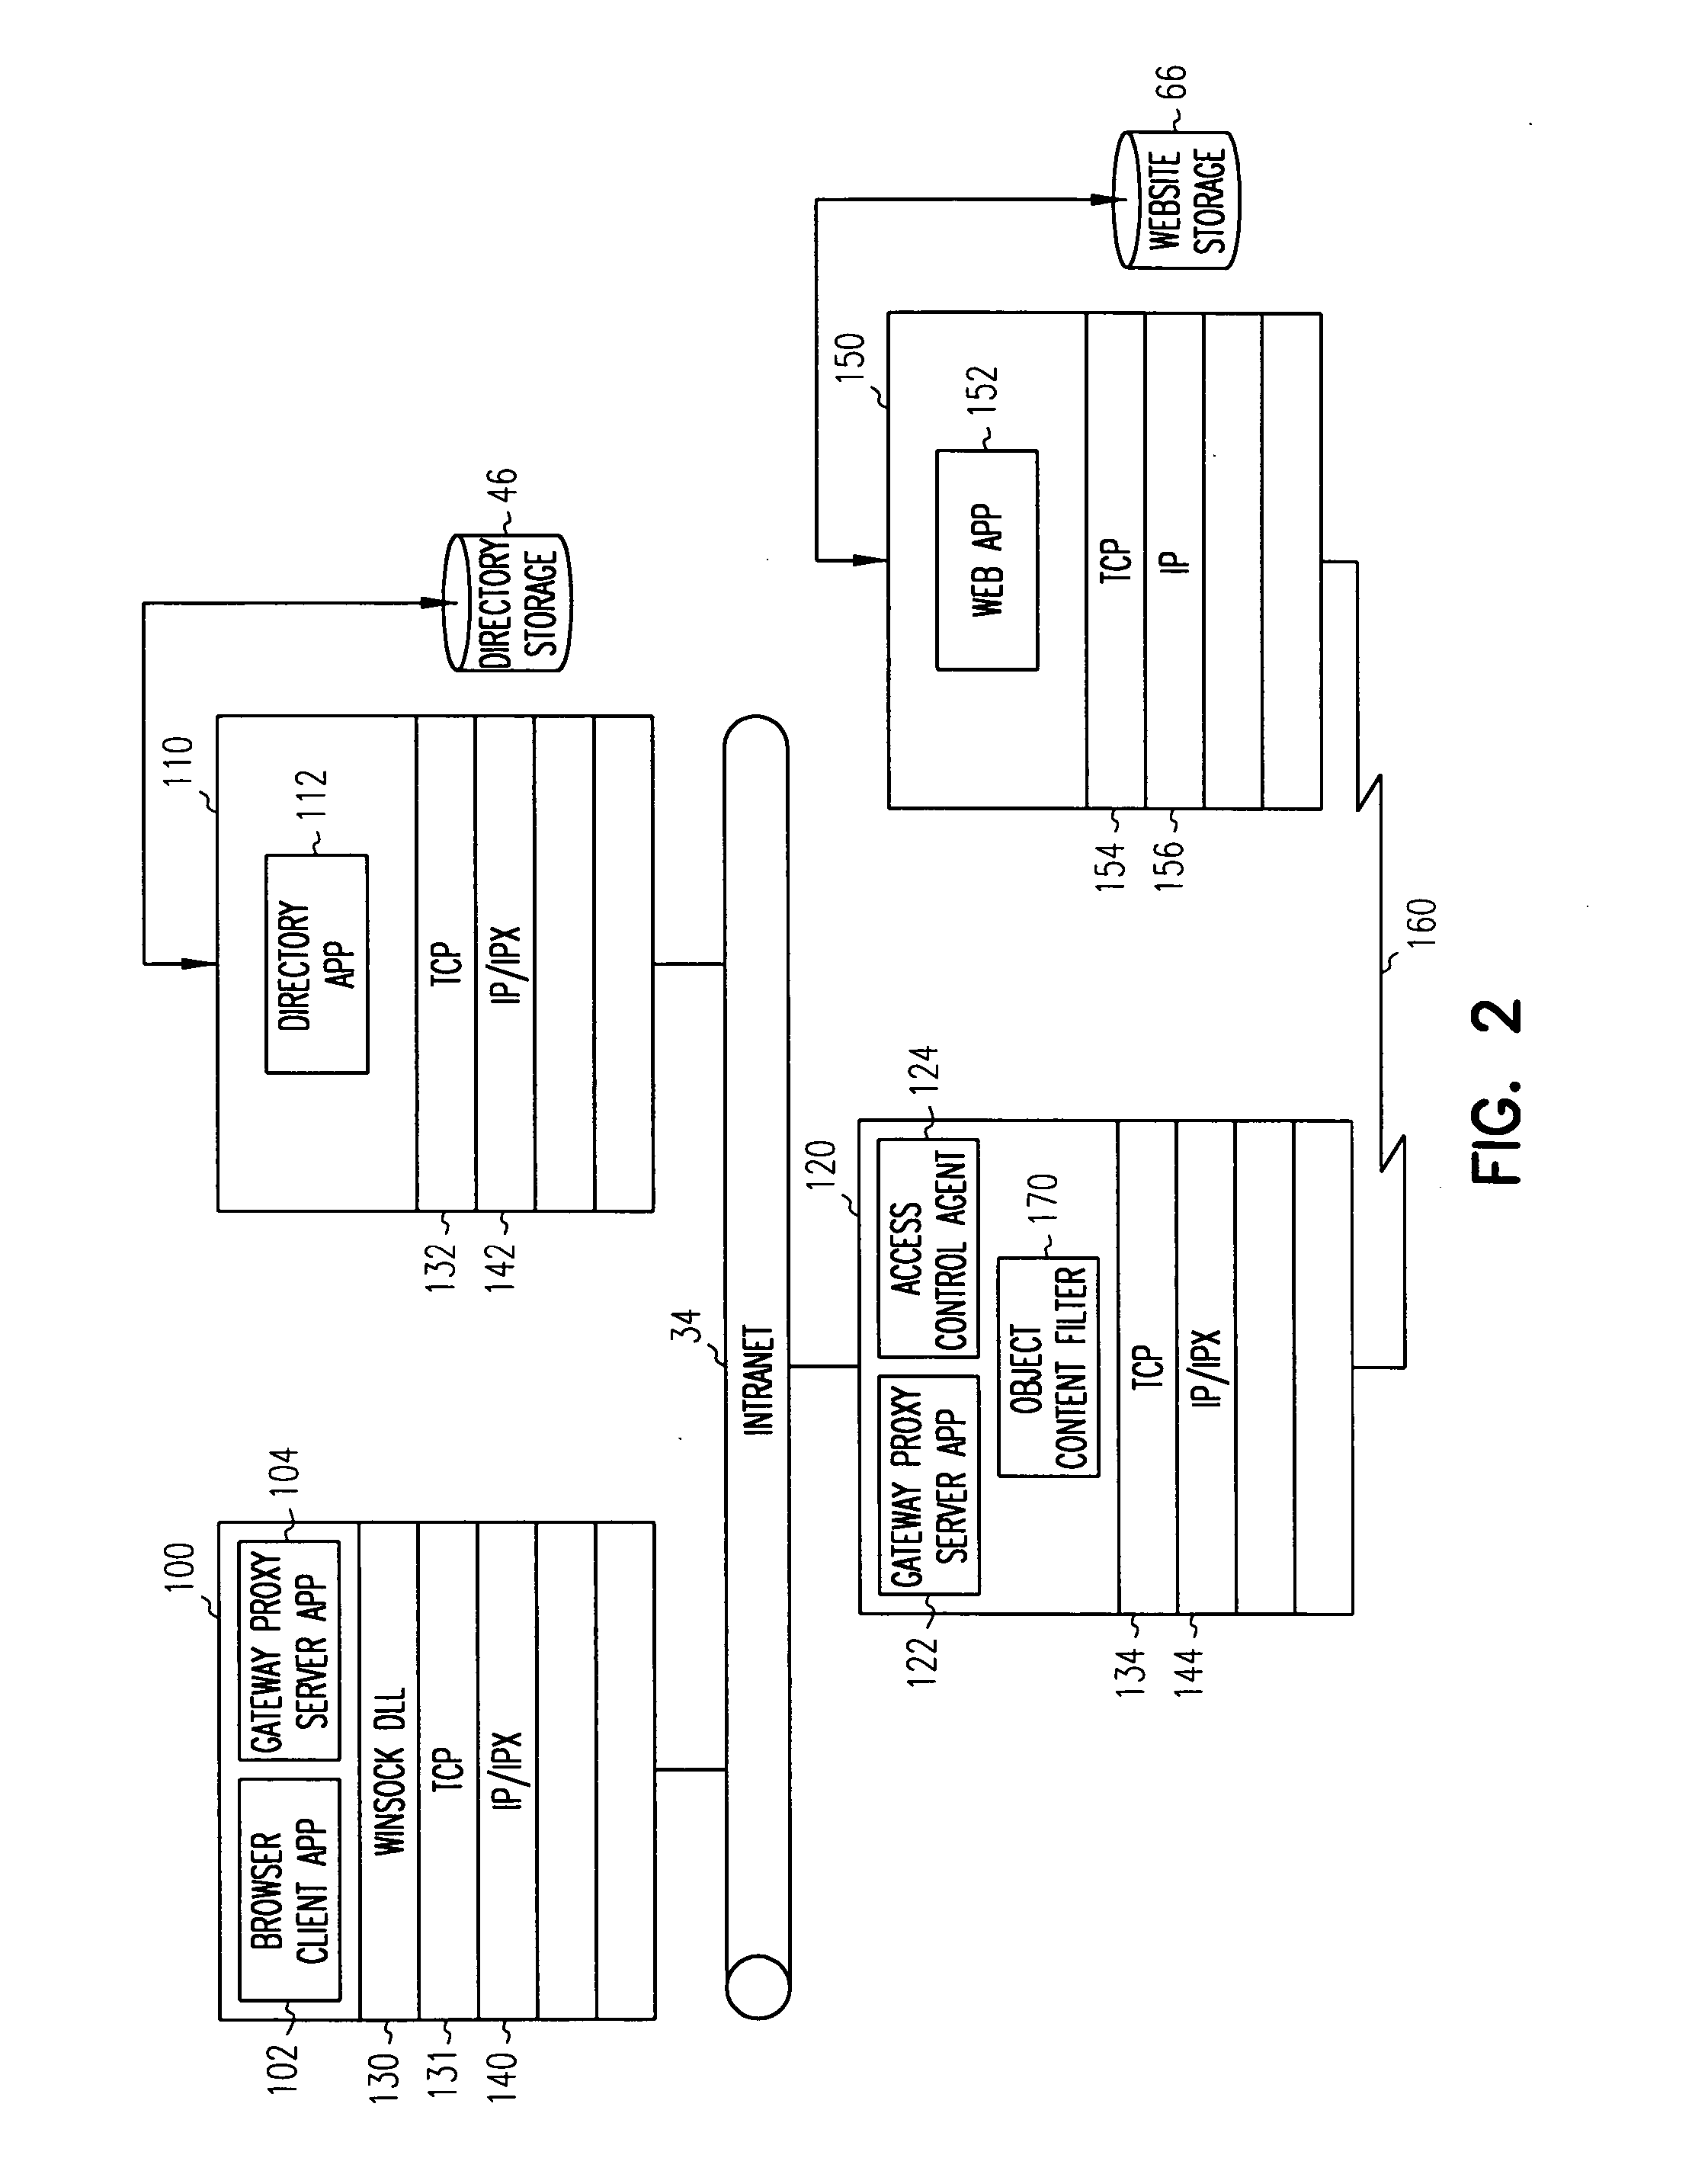 System and method for filtering of web-based content stored on a proxy cache server